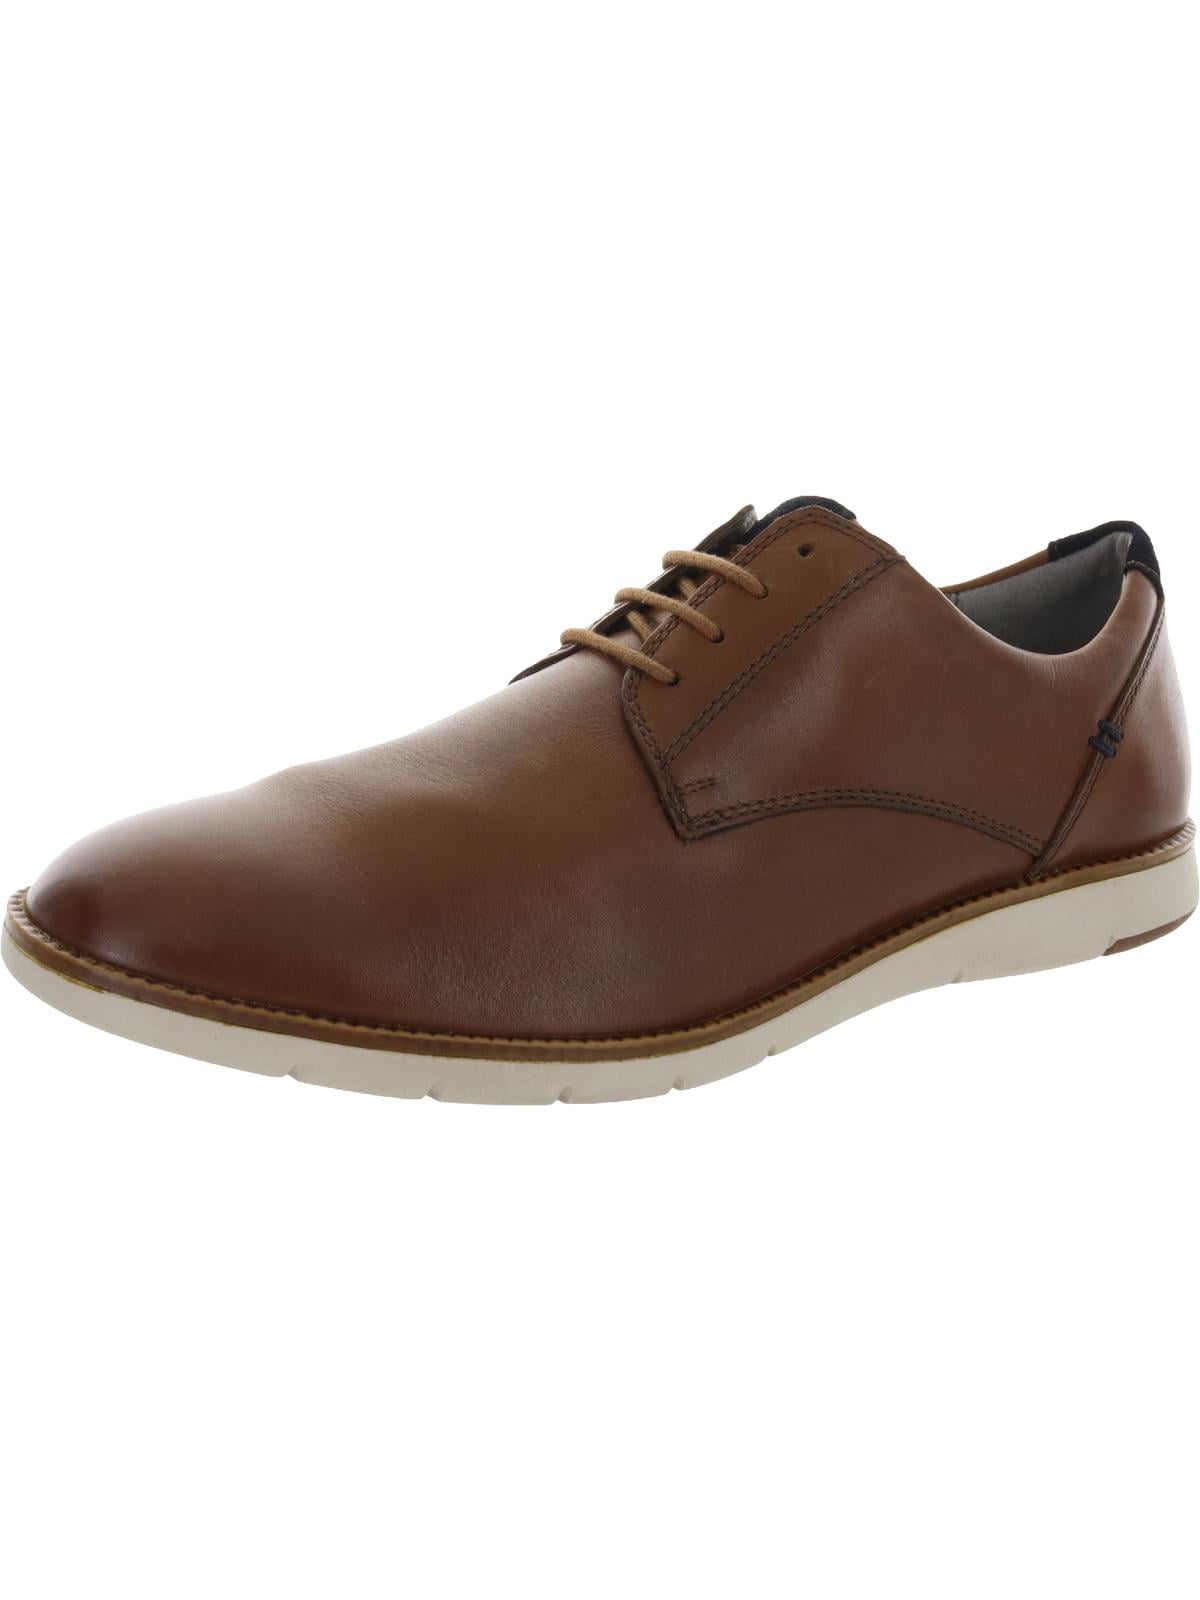 Unlisted by Kenneth Cole Design 30621 Mens Brown Leather Plain Toe Oxfords Shoes